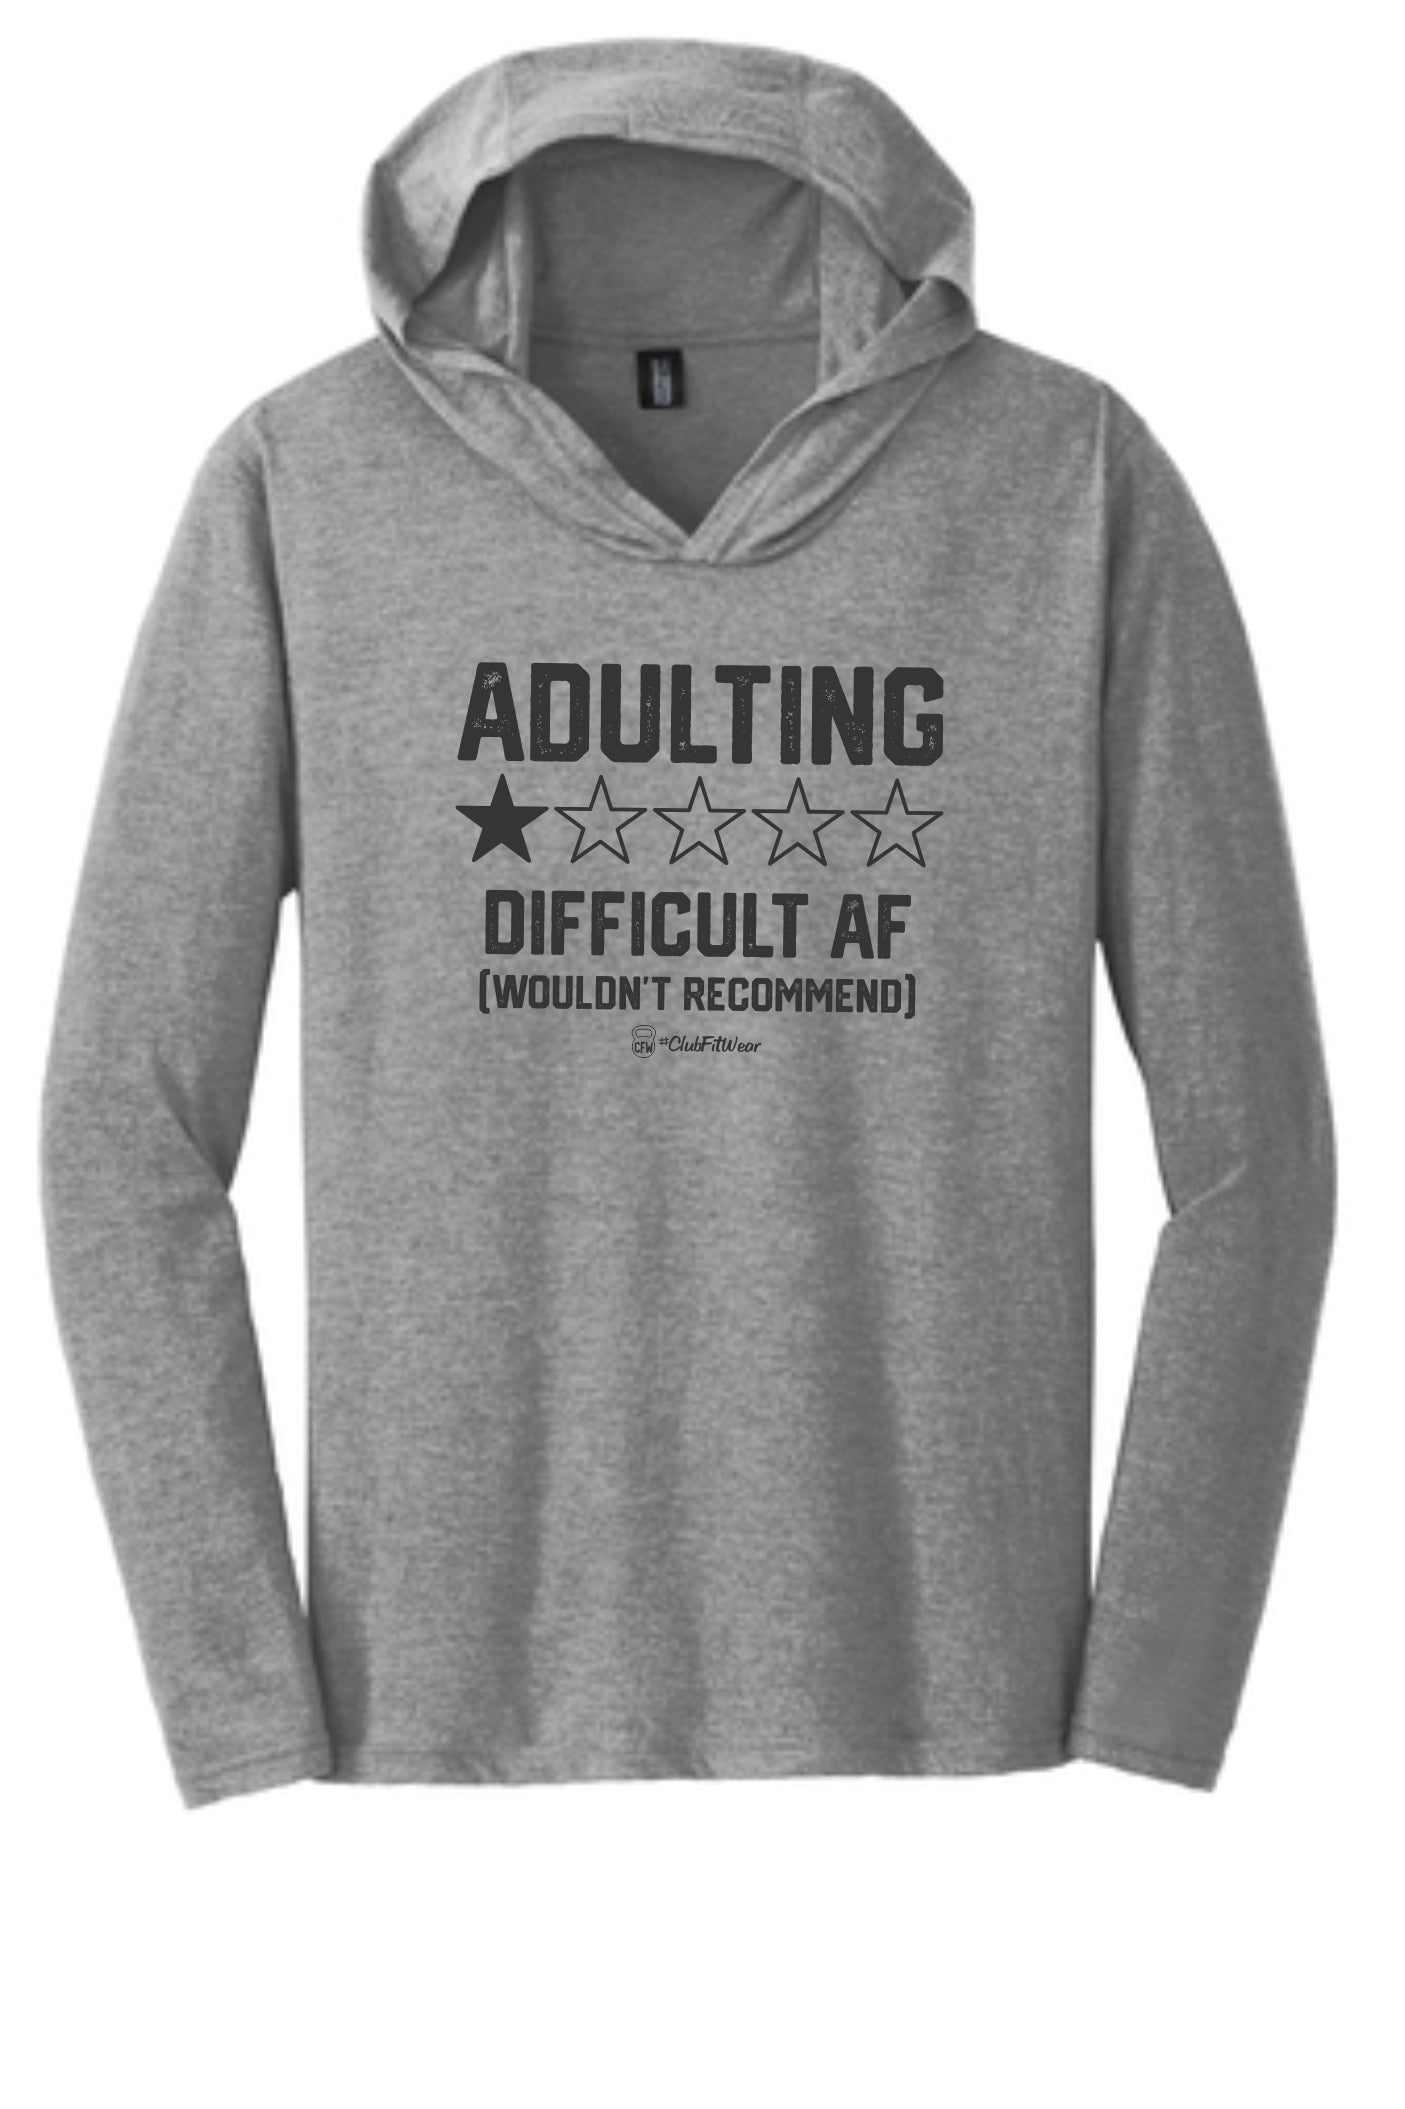 Adulting Difficult AF Wouldn't Recommend - Unisex Hooded Pullover